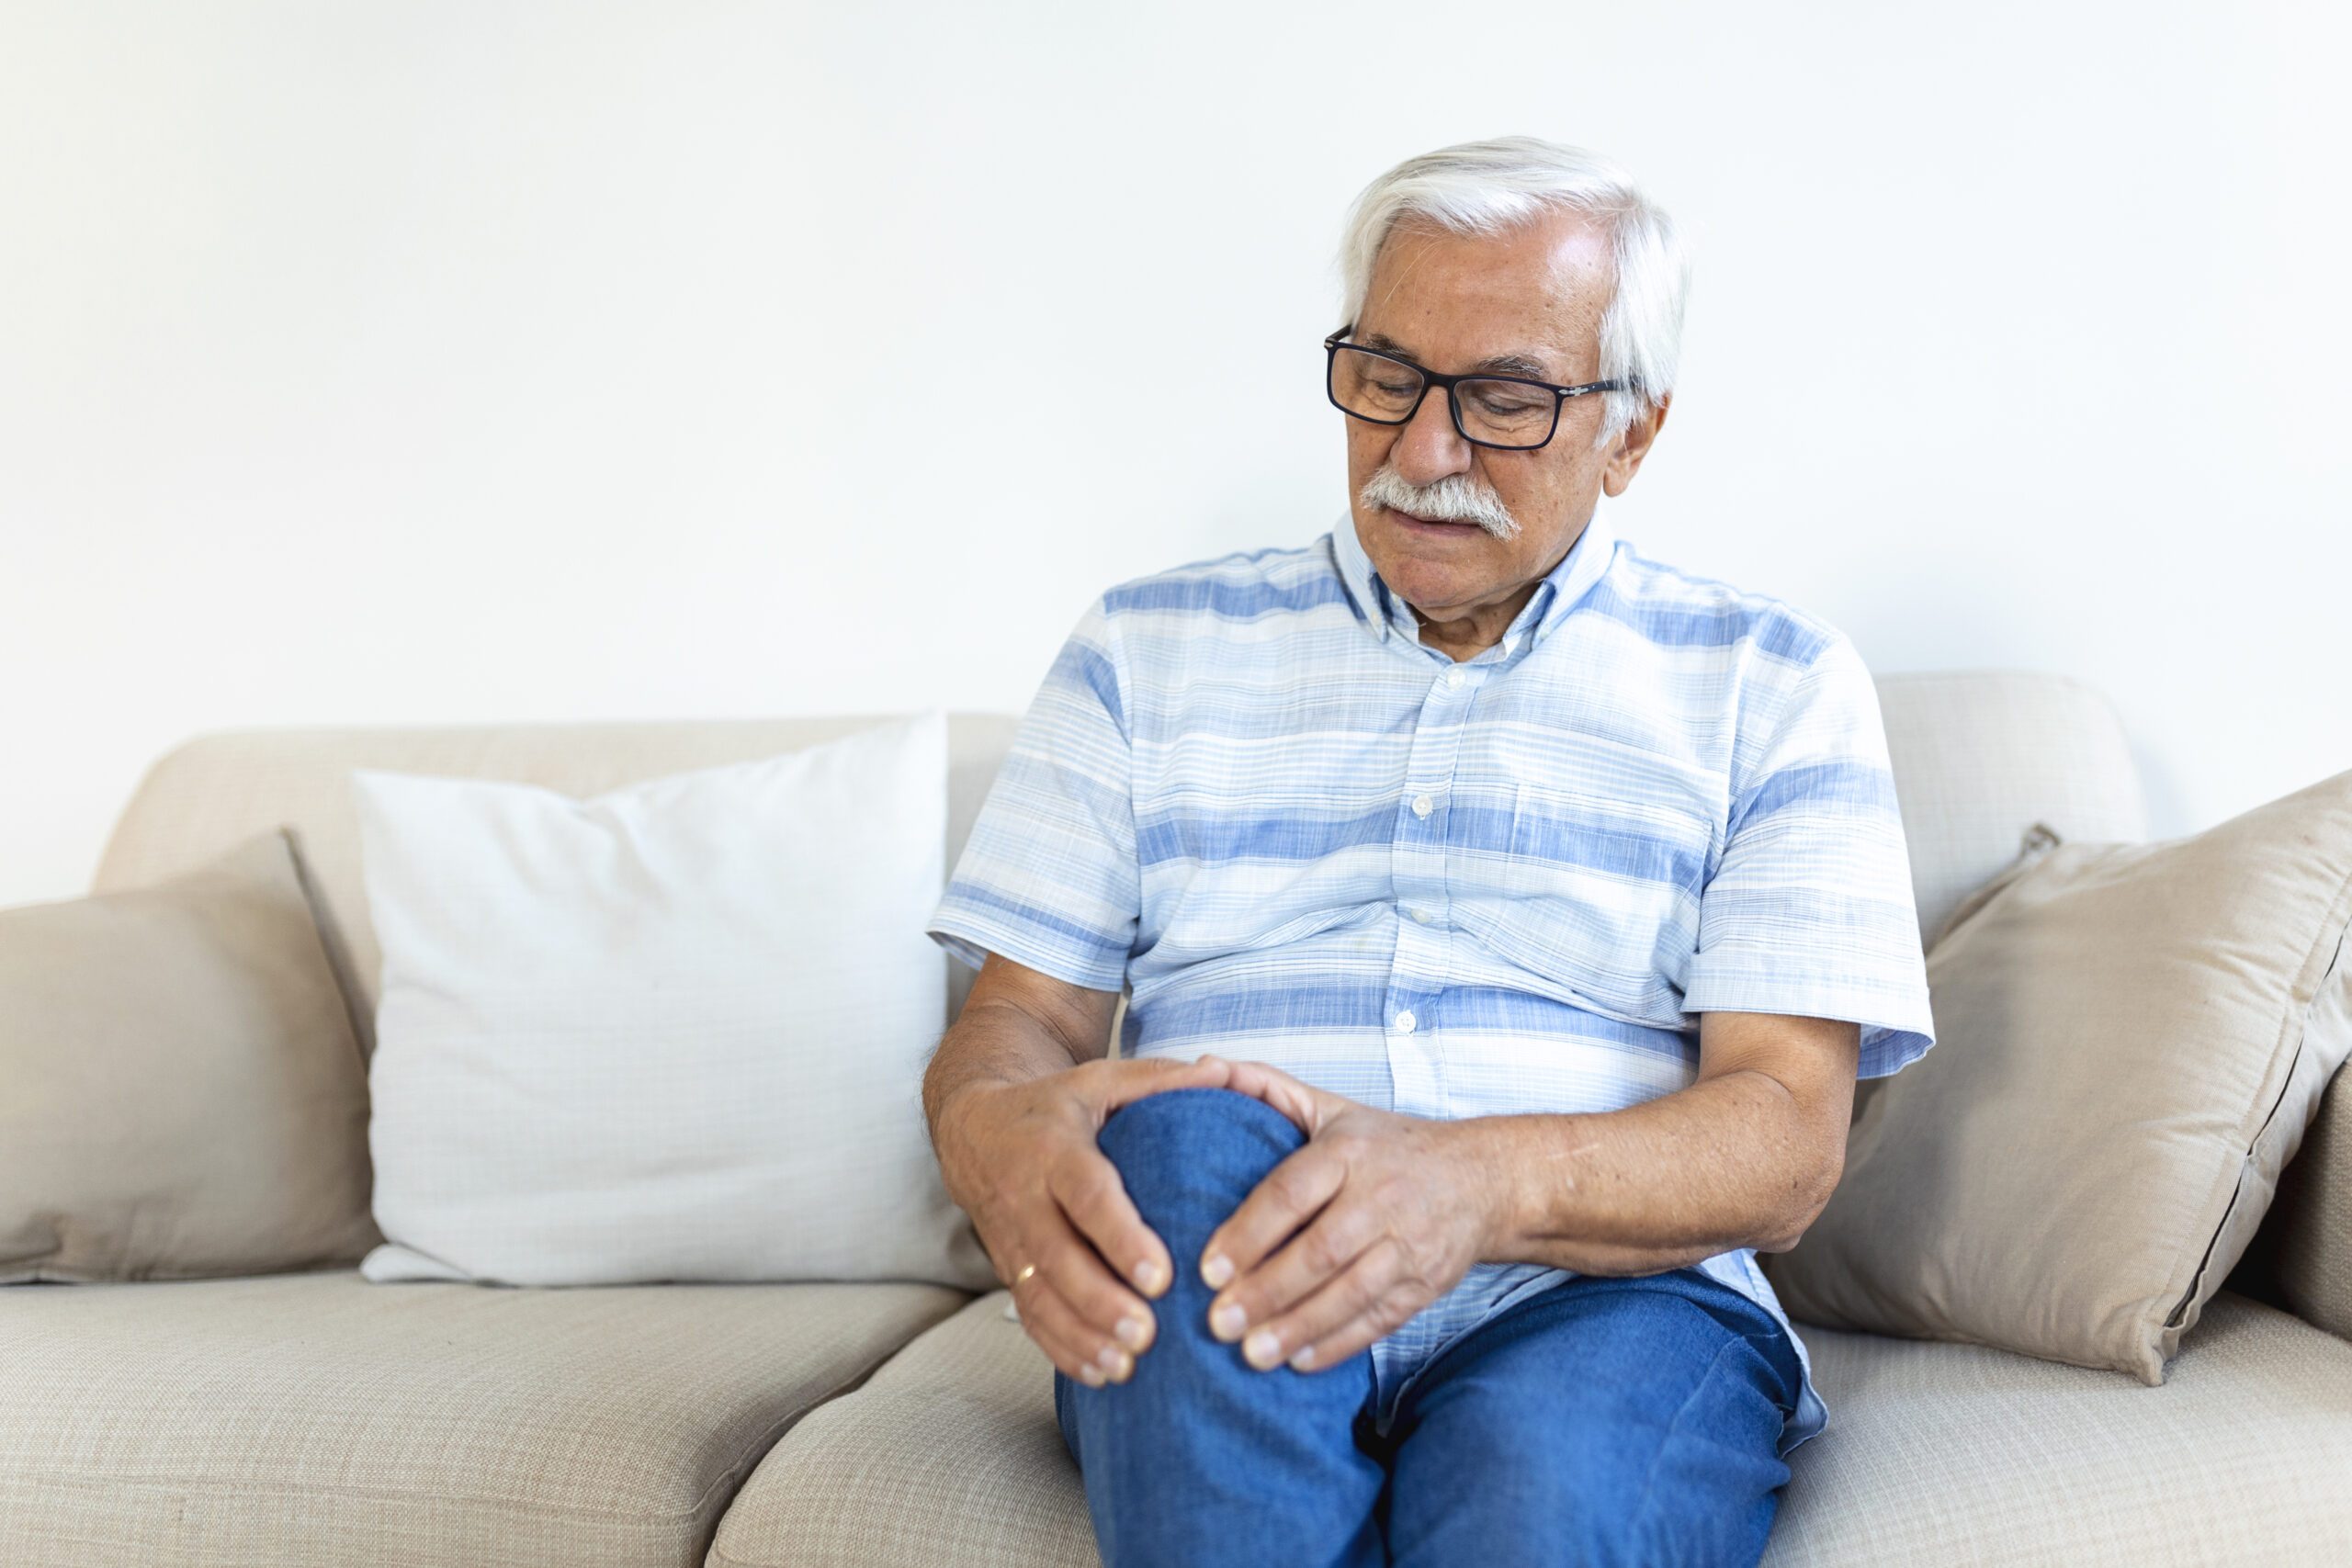 https://www.freepik.com/free-photo/elderly-man-sitting-sofa-home-touching-his-painful-knee-people-health-care-problem-concept-unhappy-senior-man-suffering-from-knee-ache-home_28002875.htm#query=os%20arthrose&position=14&from_view=search&track=ais">Image by stefamerpik on Freepik